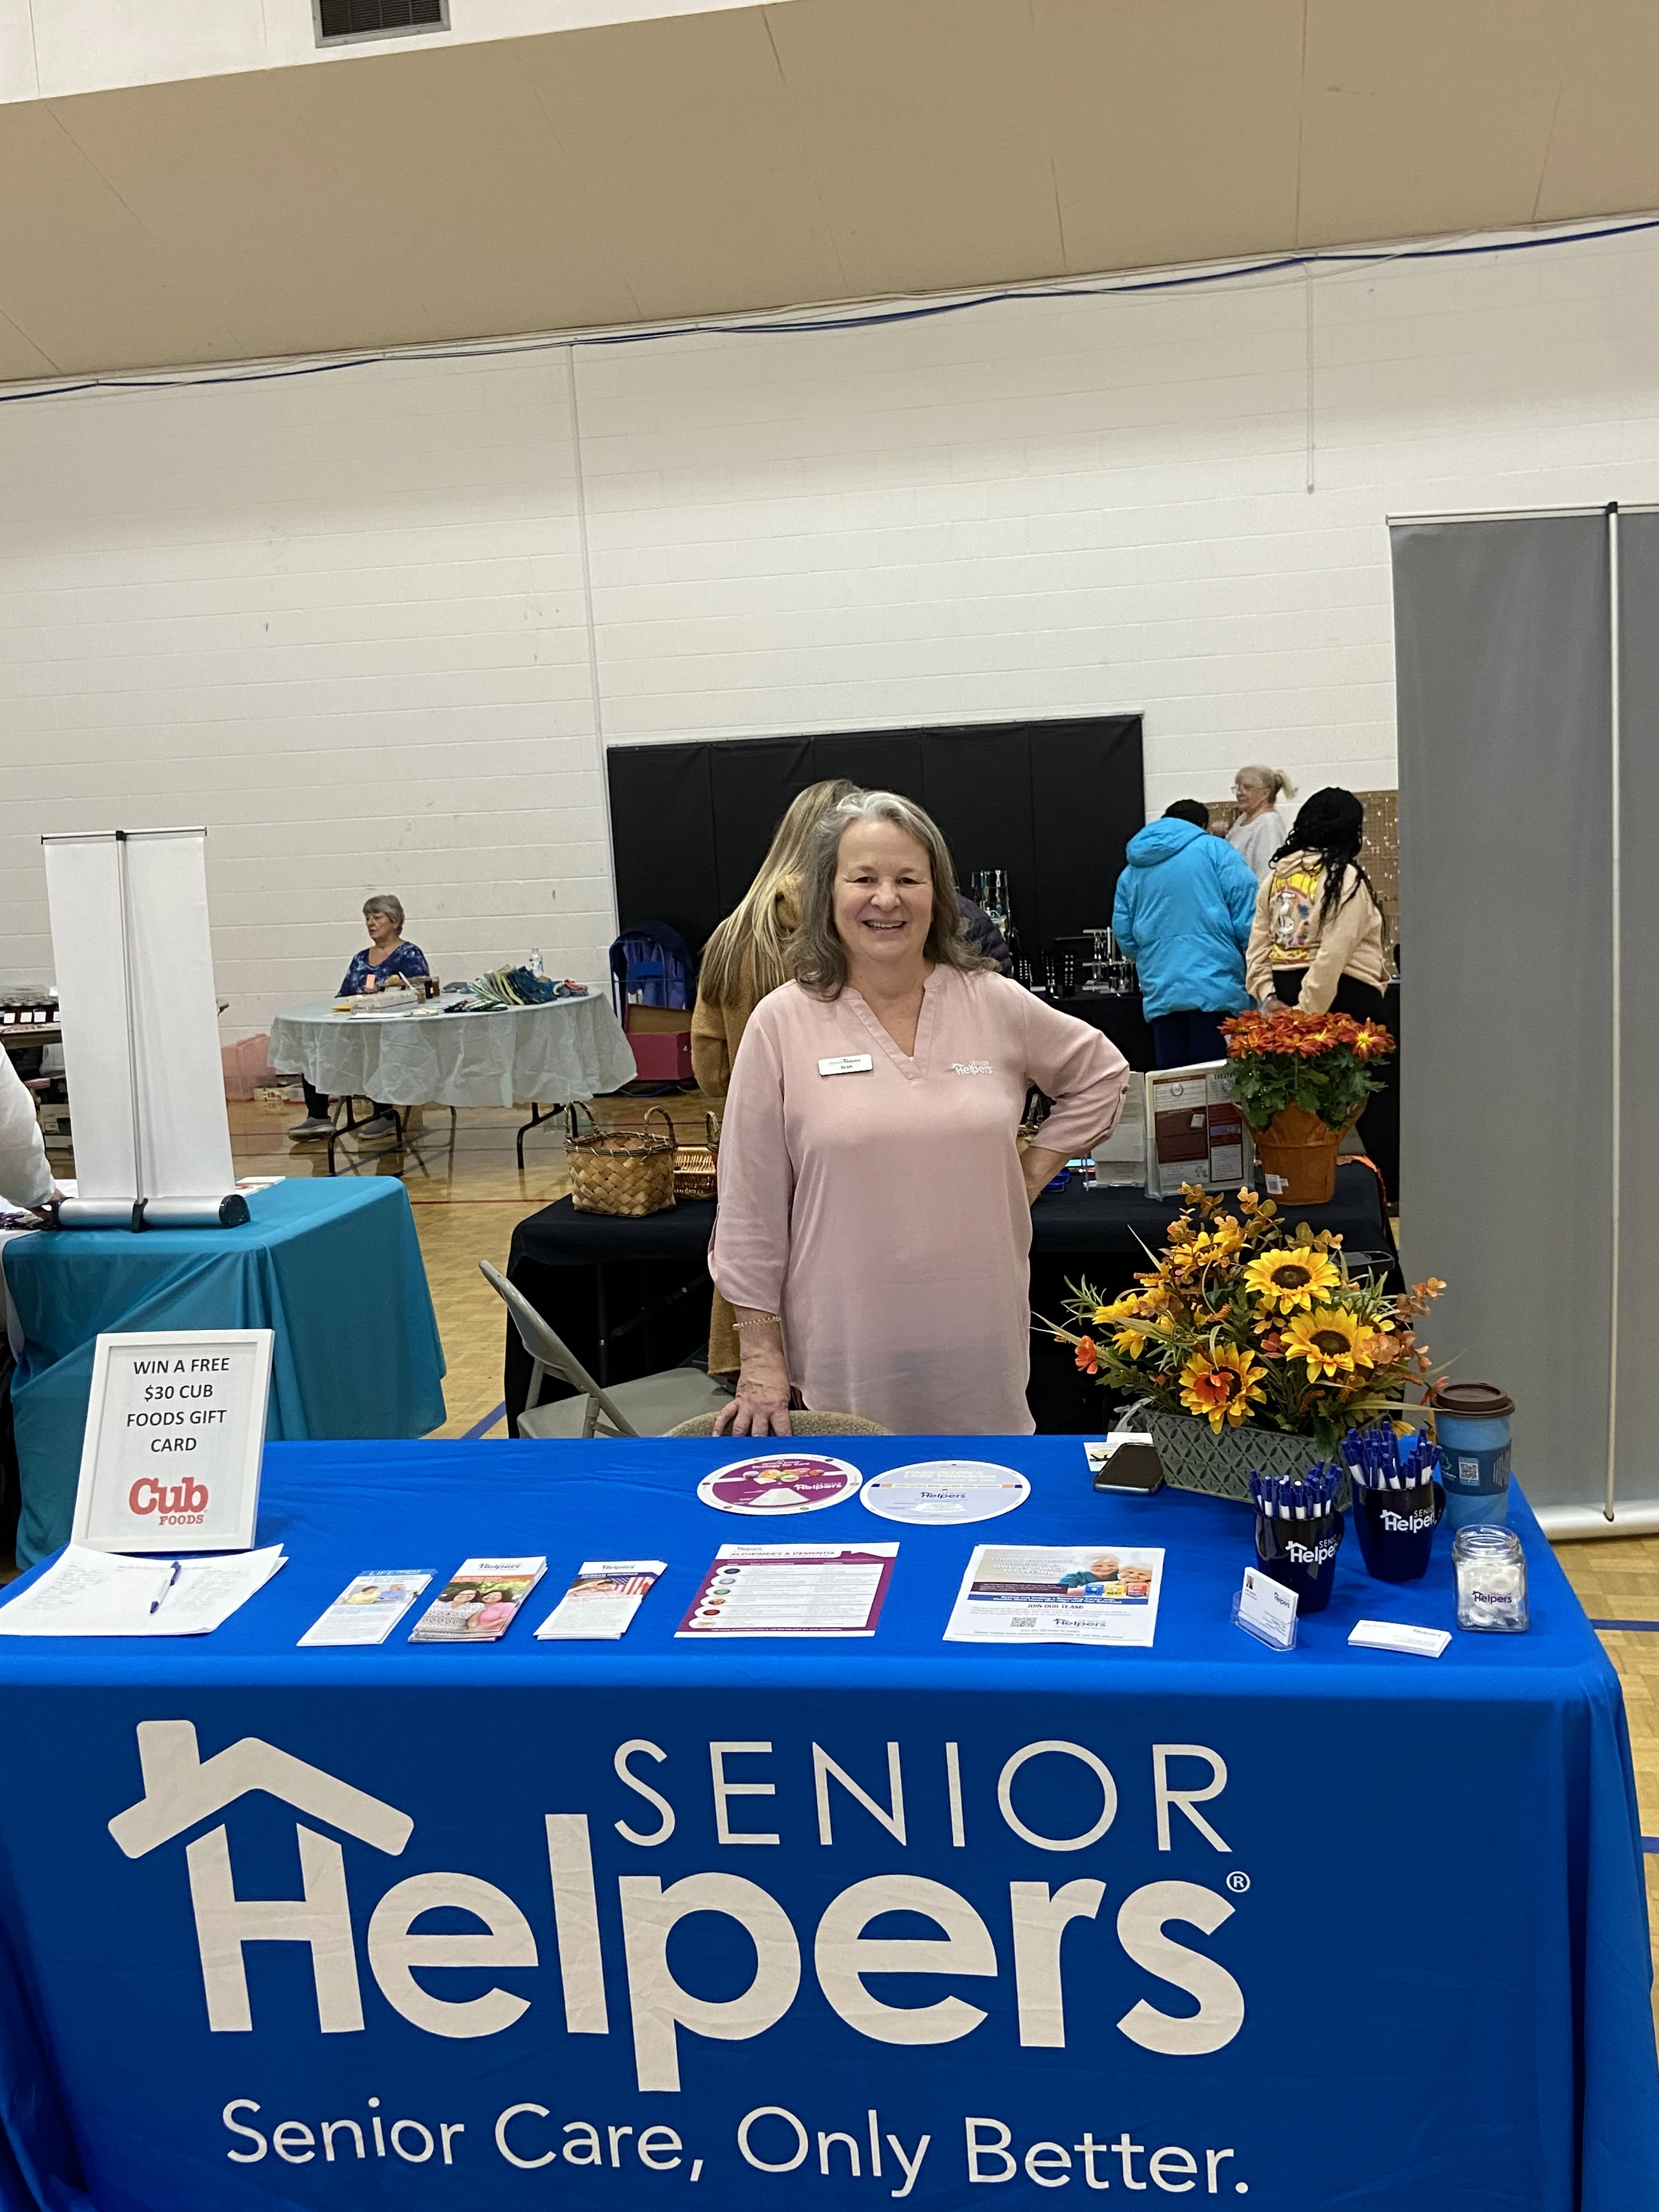 Check out Senior Helpers of Lake Minnetonka's Operations Manager, Jean Connor, at the Robbinsdale Senior Fair!